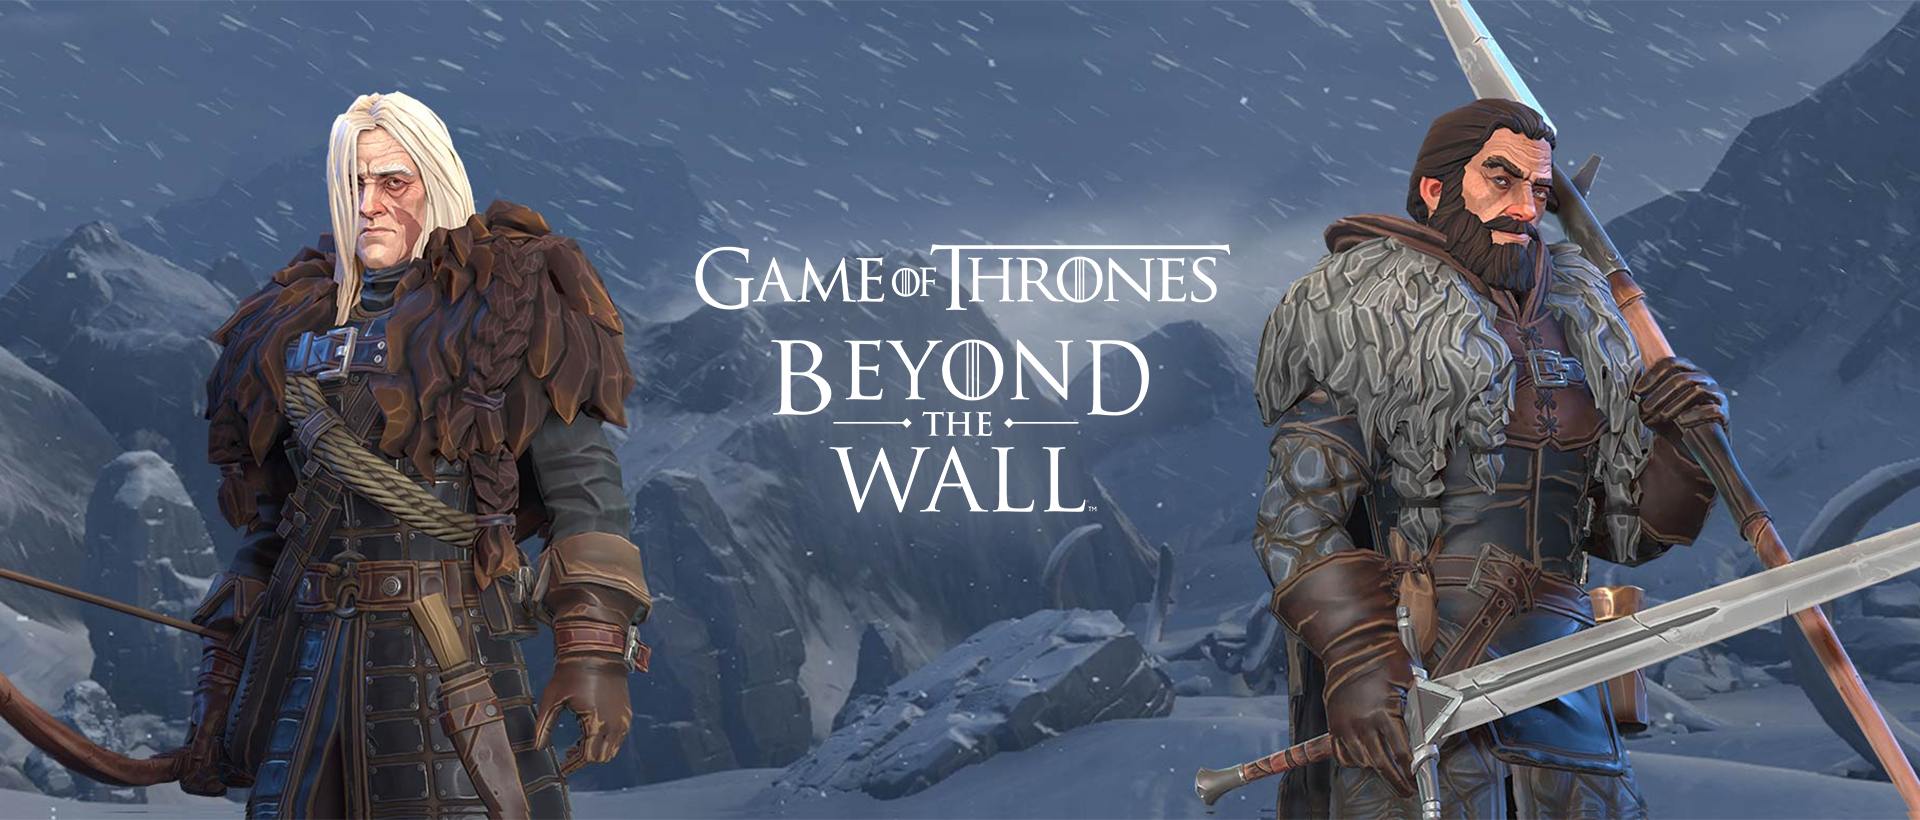 game of thrones beyond the wall best units